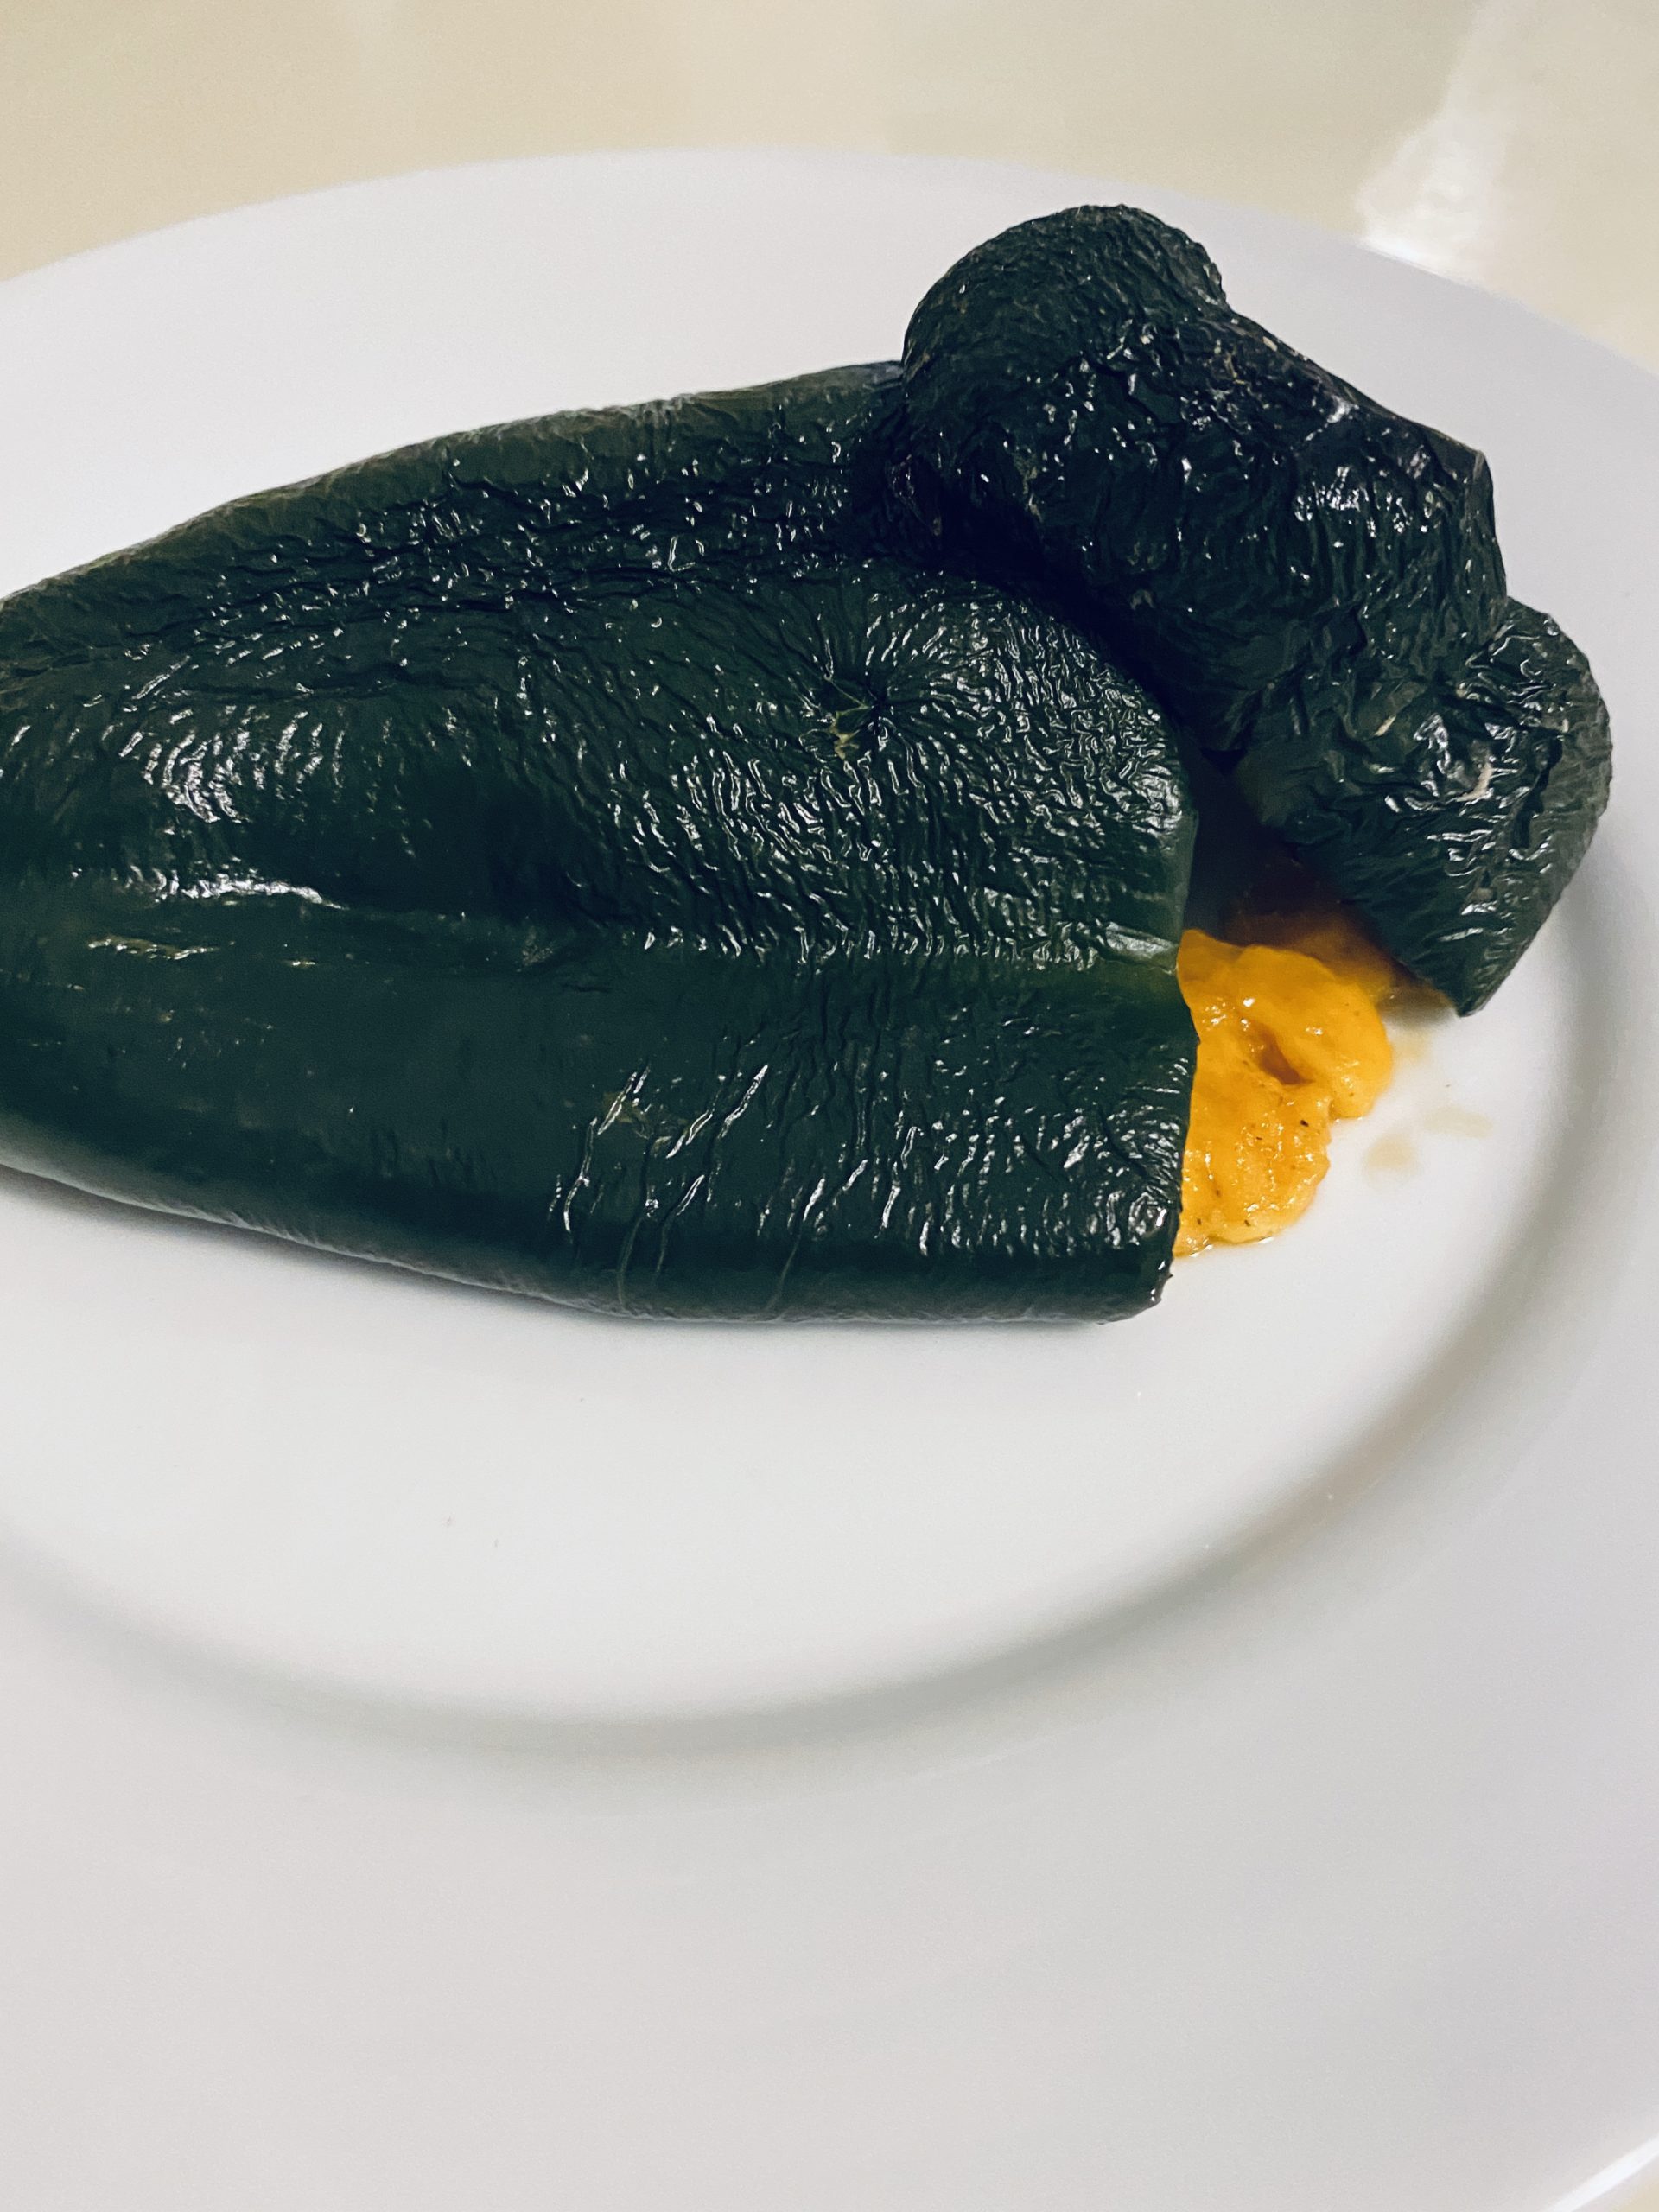 Stuffed poblano peppers ready to be enjoyed.